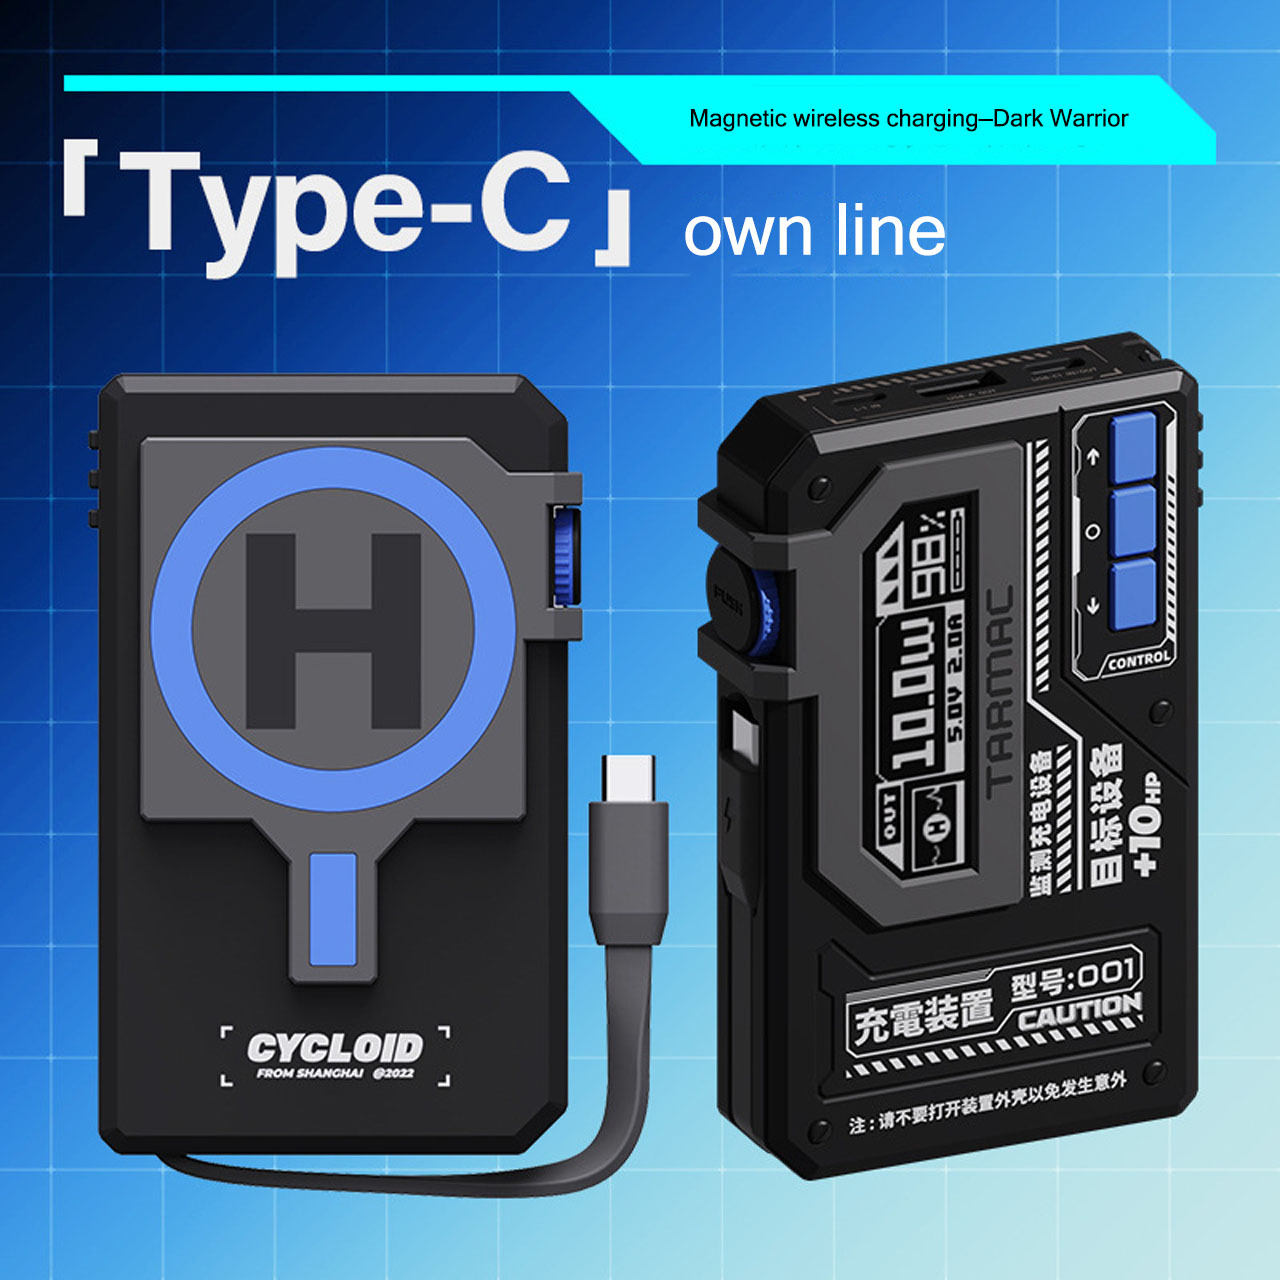 CYCLOID Apron H1 Magnetic Charger is applicable to iPhone14promax Apple MagSafe Wireless Fast Charge Cyberpunk 22.5W self-contained cable super capacity mobile power supply